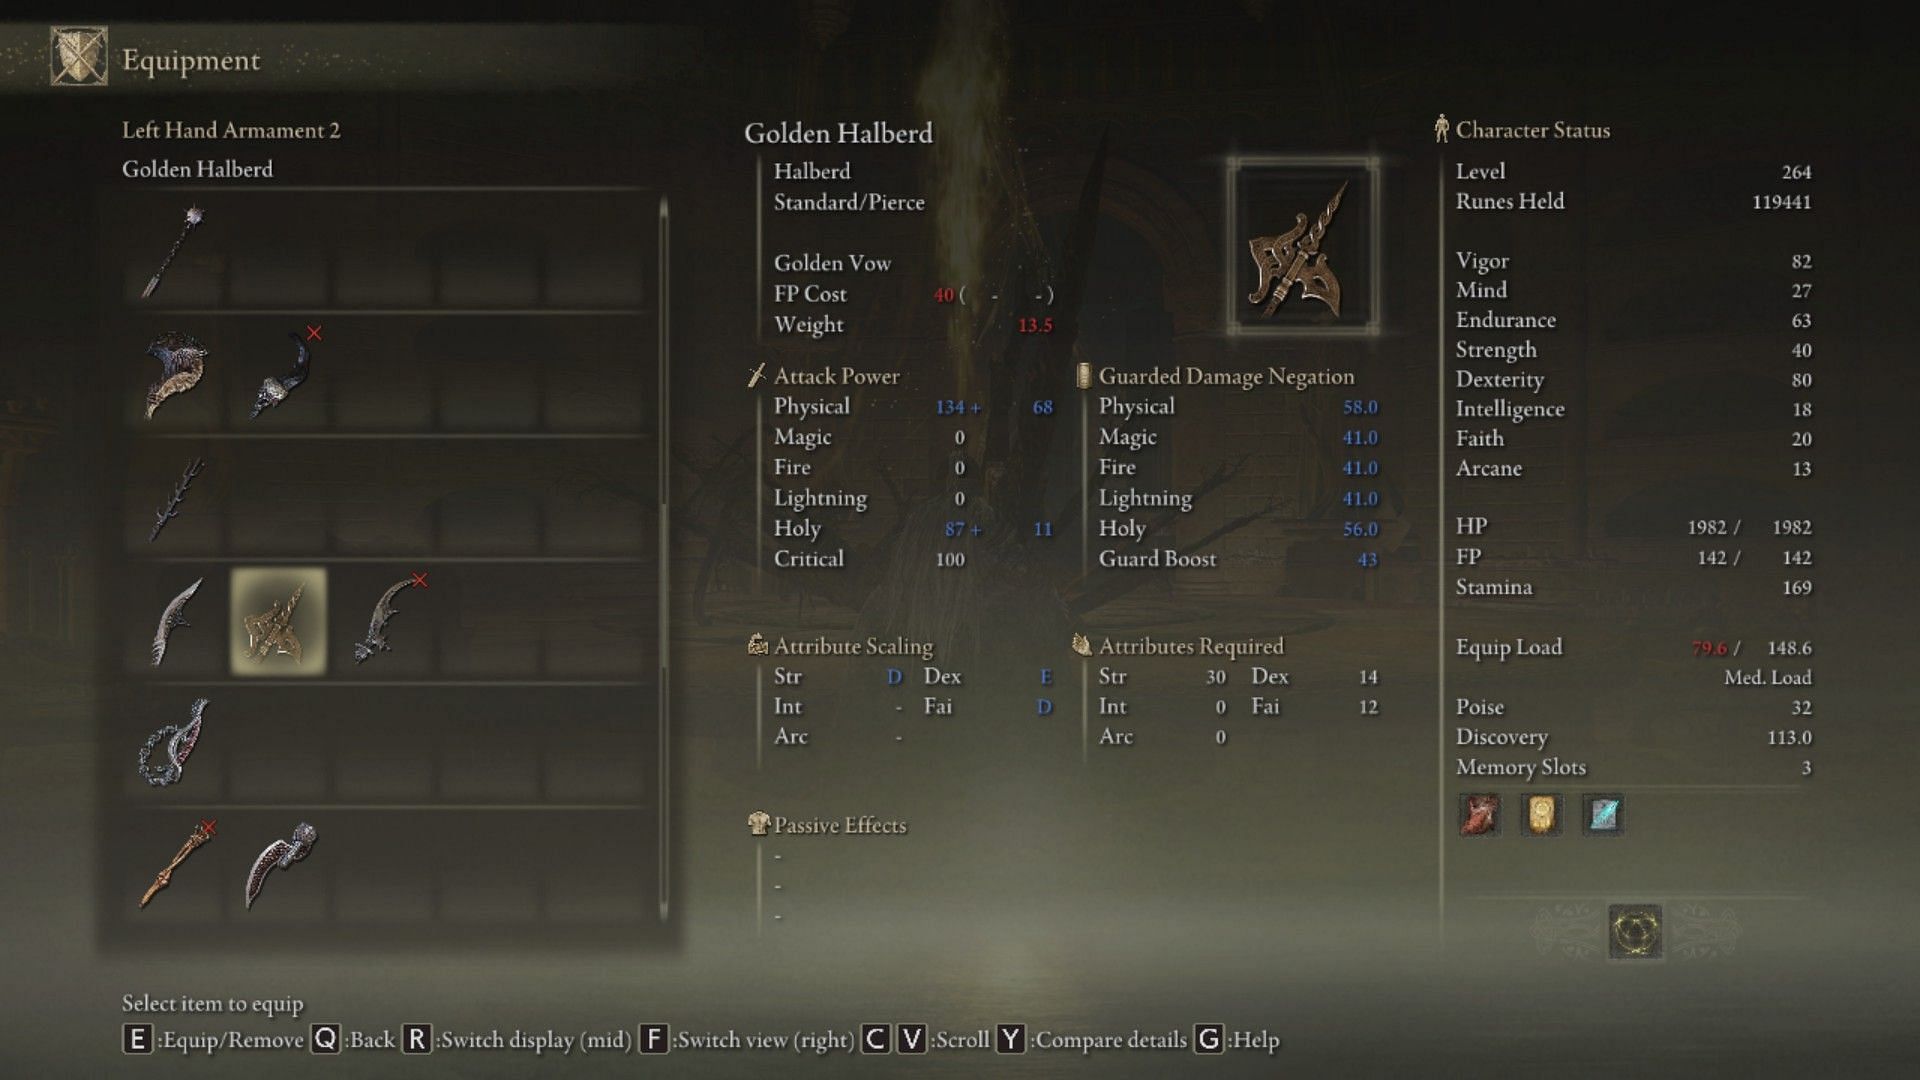 Golden Halberd can practically out-damage almost 95% of the weapons in this game (Image via Elden Ring)